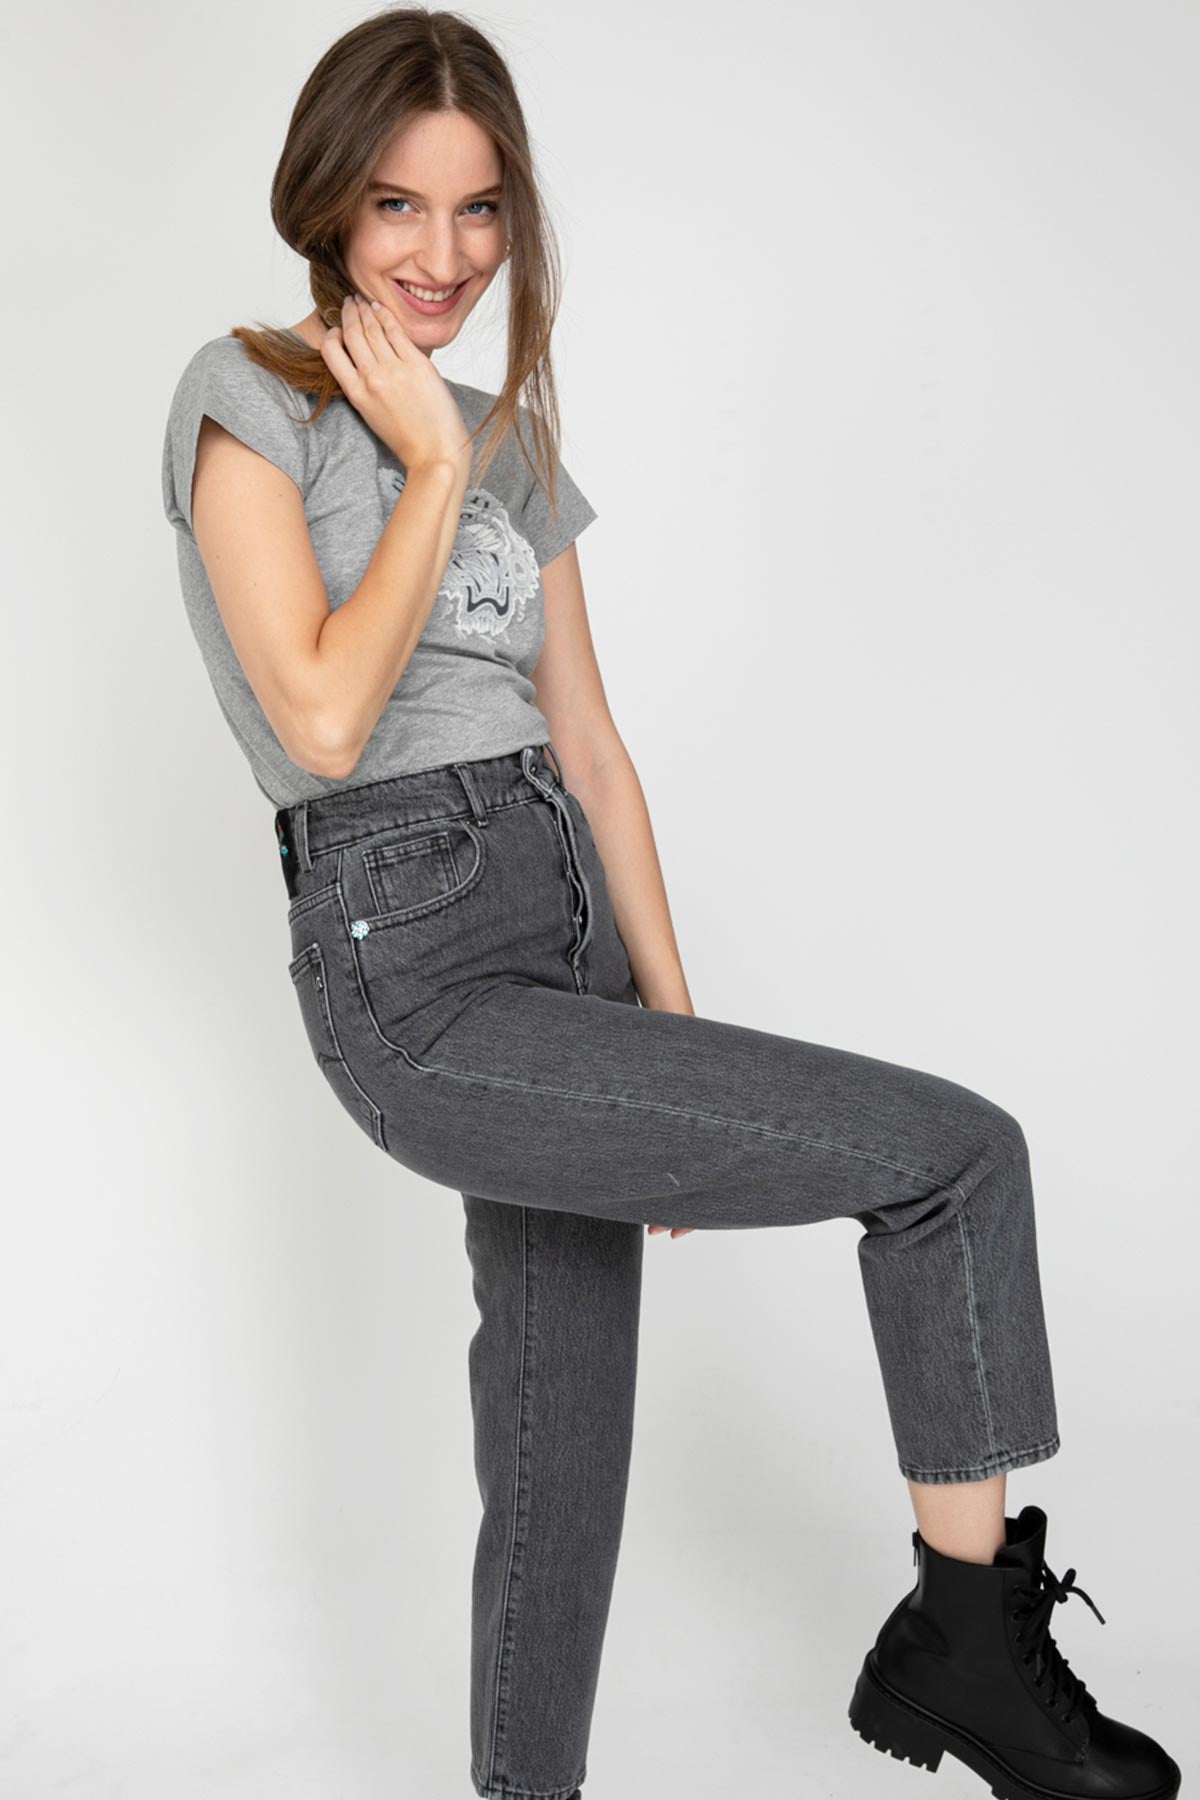 Replay Tyna Mom Fit Jeans-Libas Trendy Fashion Store